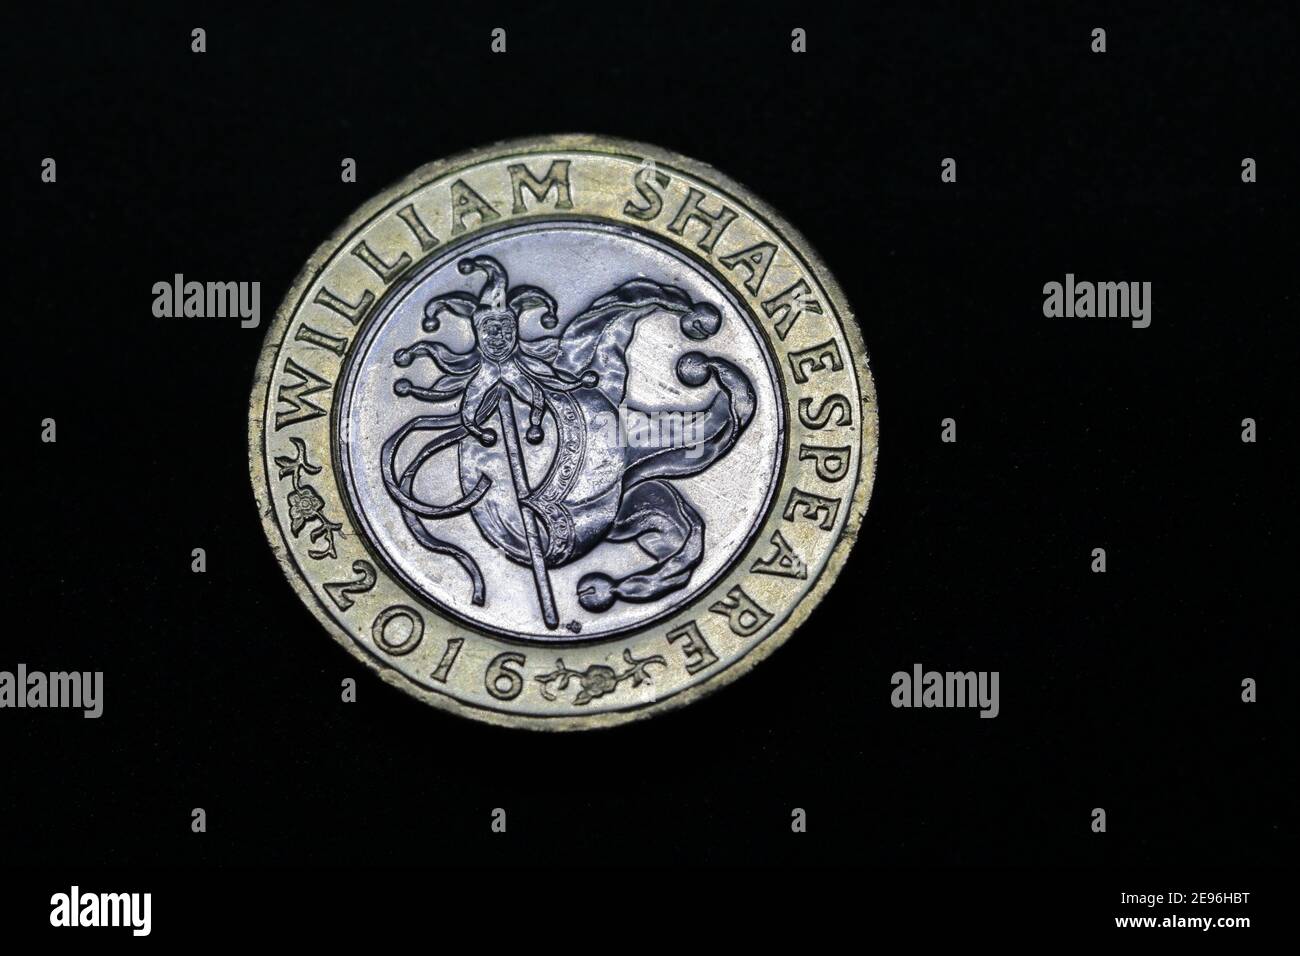 The tails side of a 2016 £2 (two pounds sterling) featuring William Shakespeare by name and an image representing theatre Stock Photo